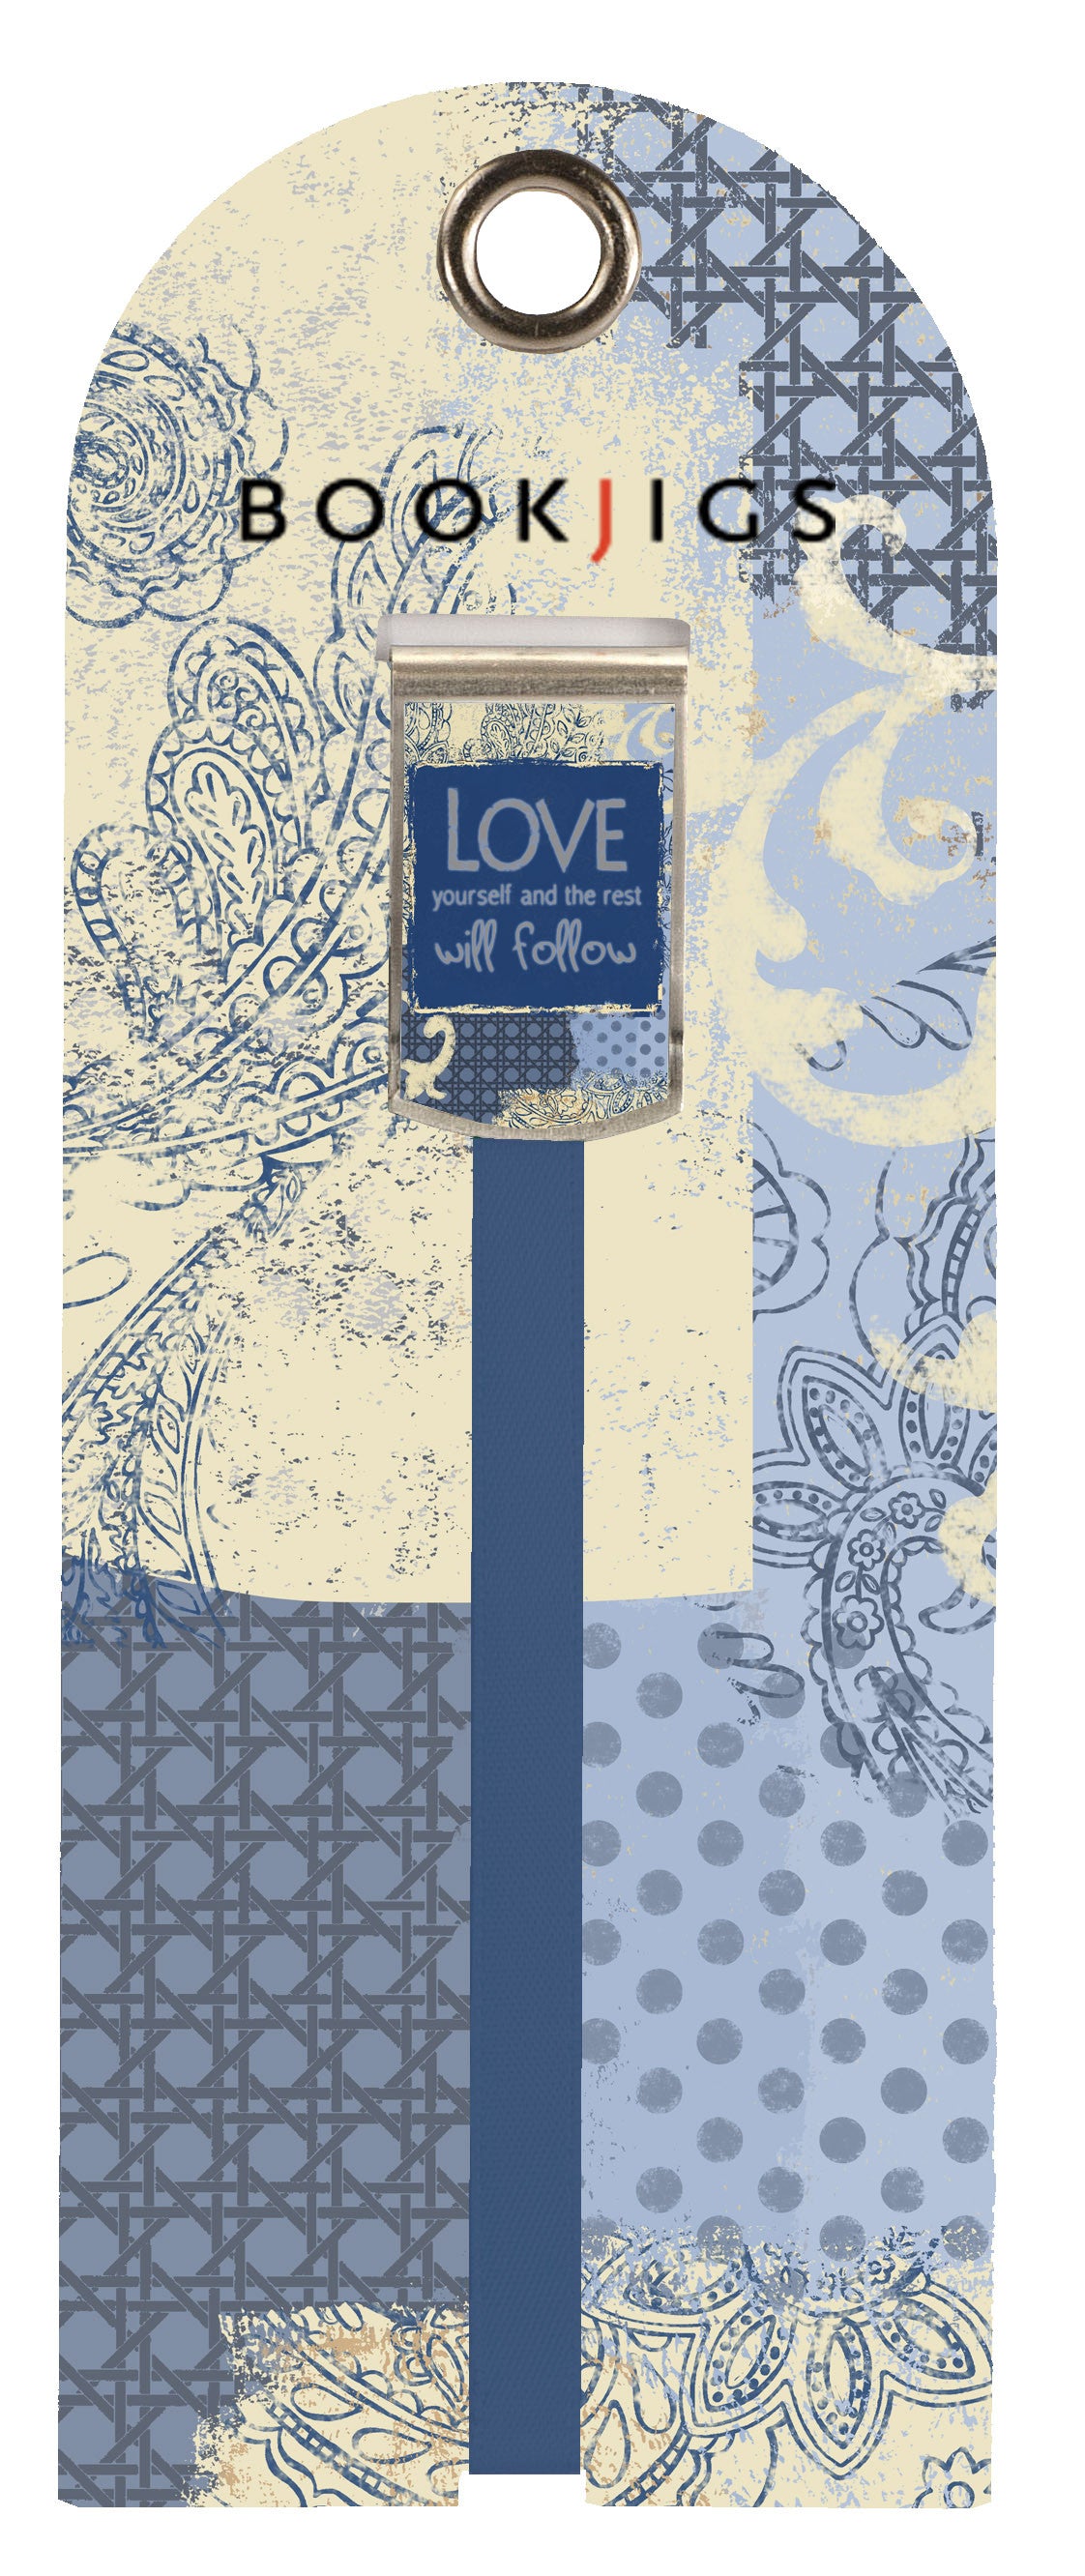 SKU : 1425 - Love Yourself and the Rest Will Follow -Bookjig